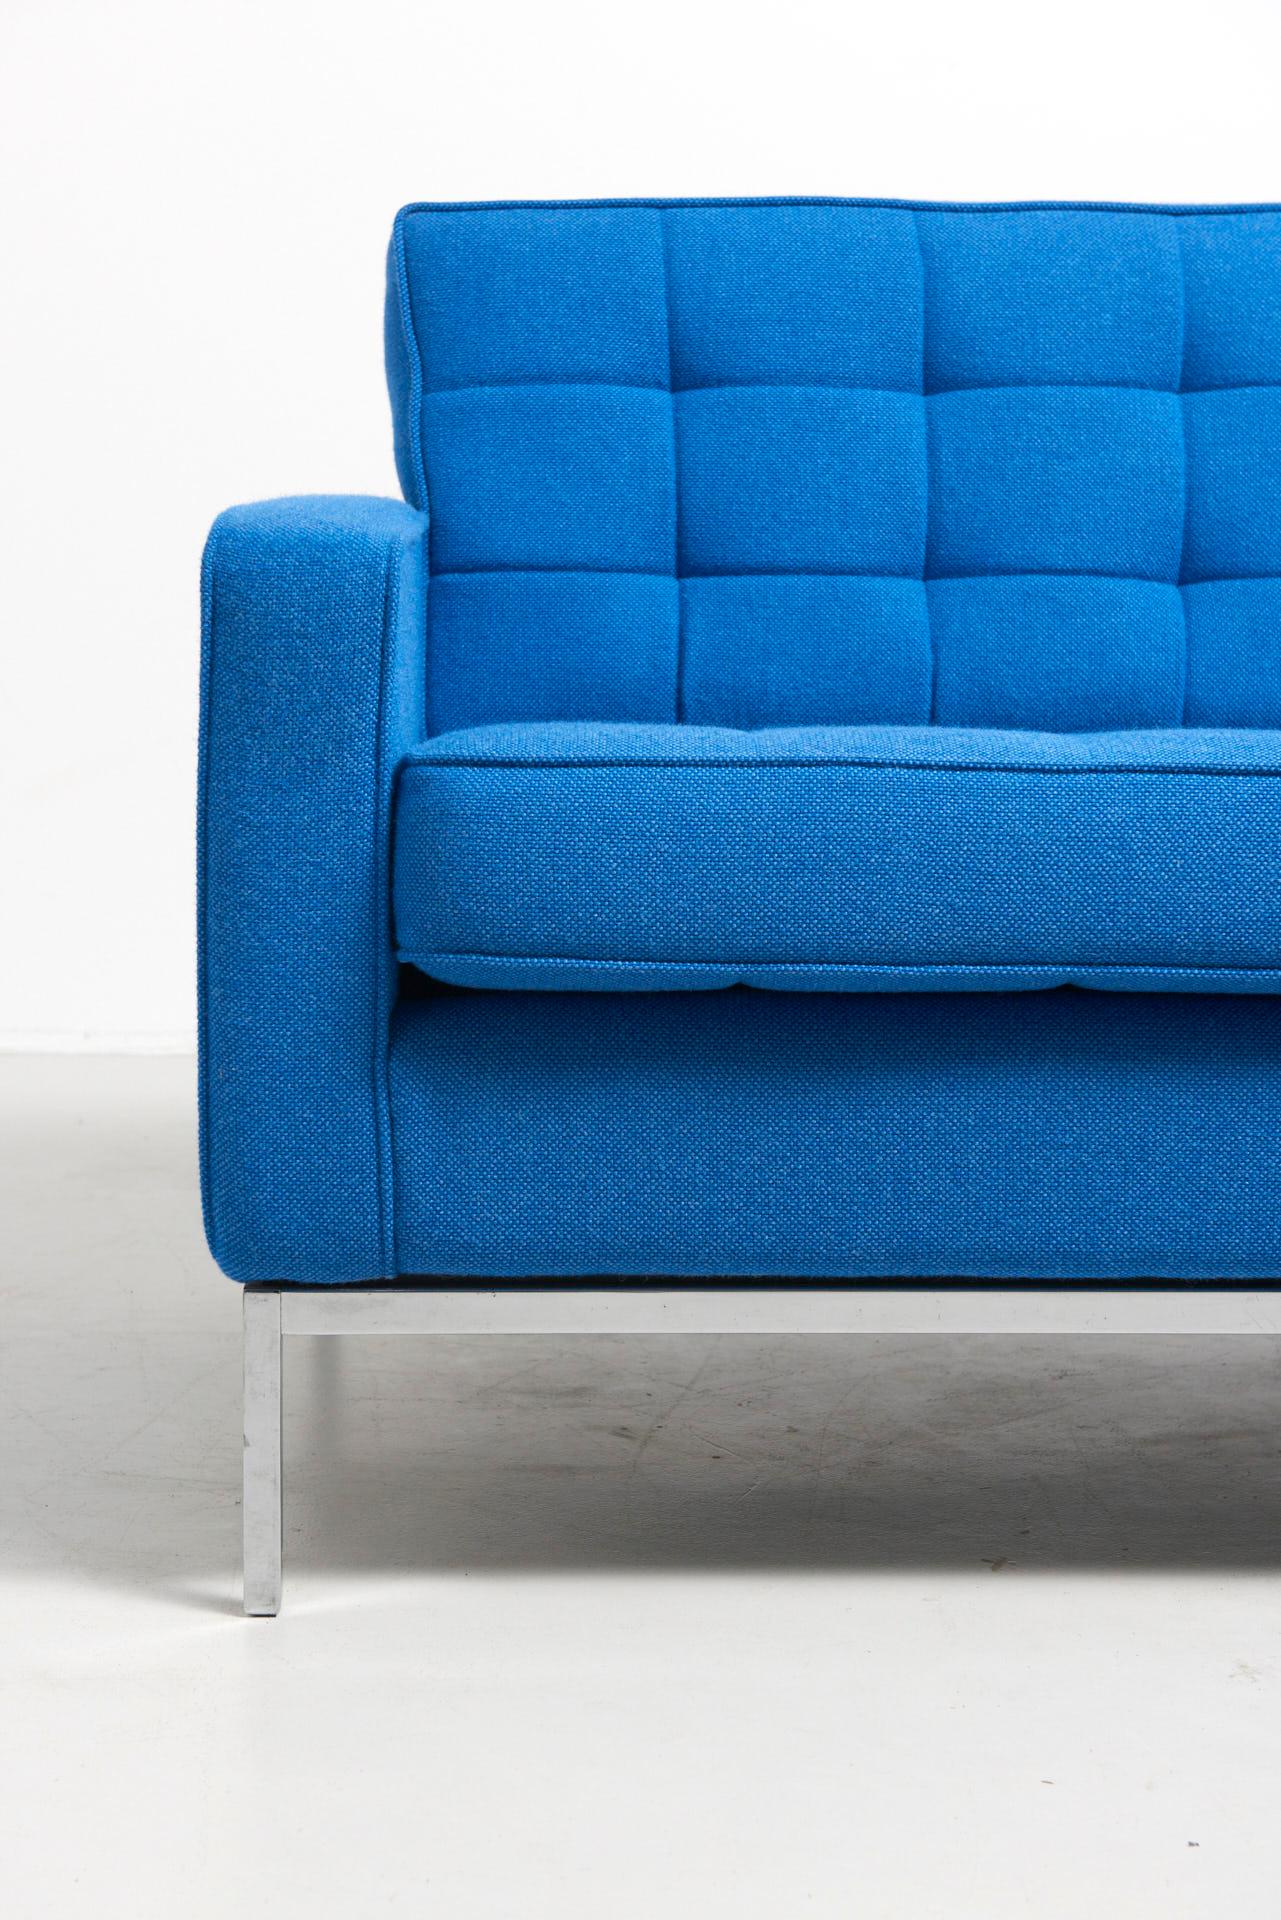 Mid-20th Century Clear Blue 3 Seat Sofa by Florence Knoll, 1954